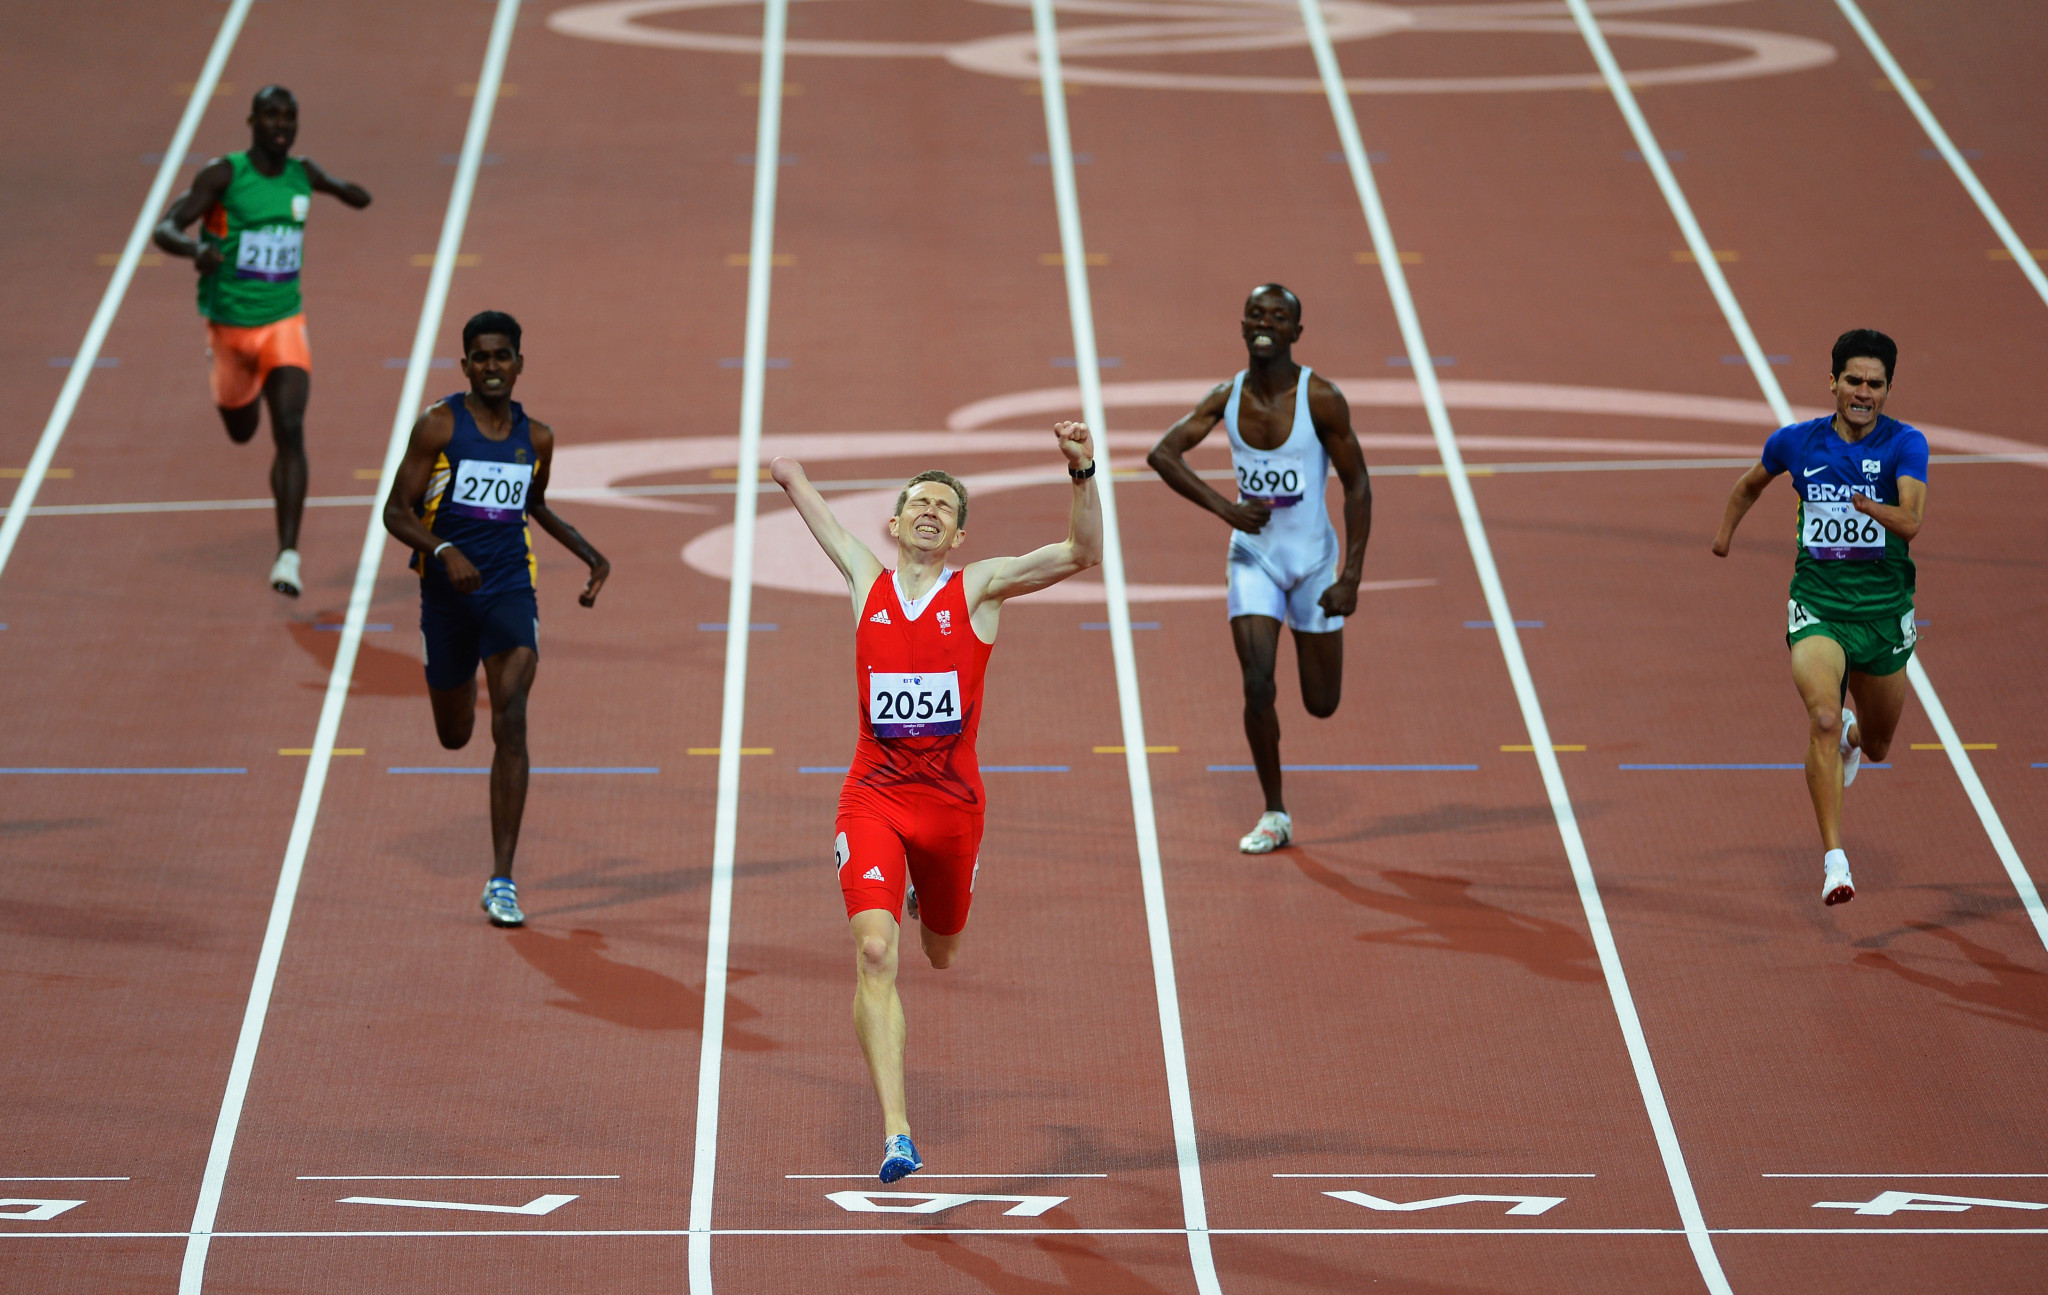 Günther Matzinger won the 400m and 800m T46 gold medals at London 2012 ©Getty Images